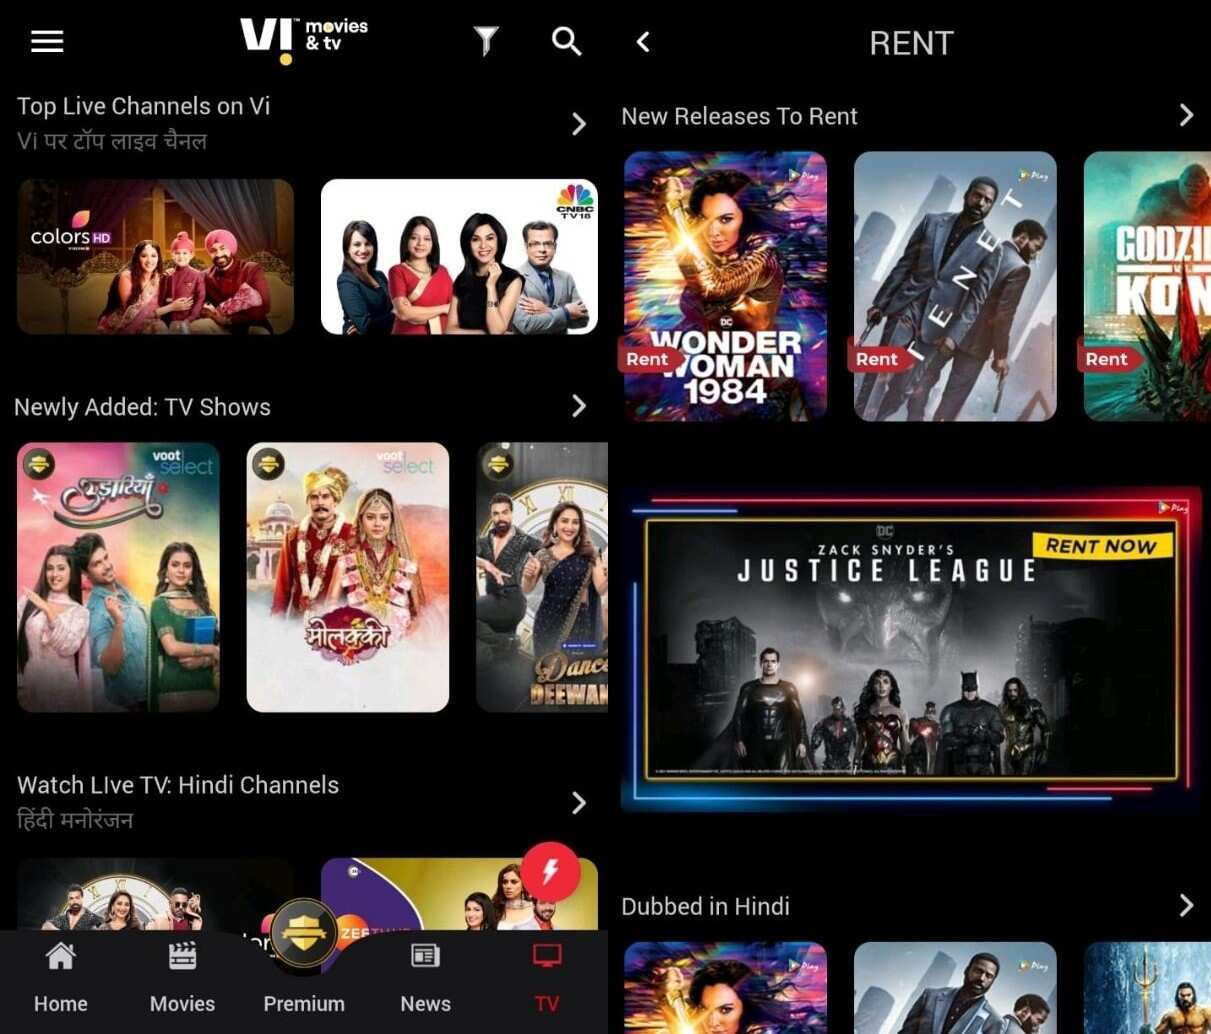 Should you subscribe to the Vi Movies and TV App?